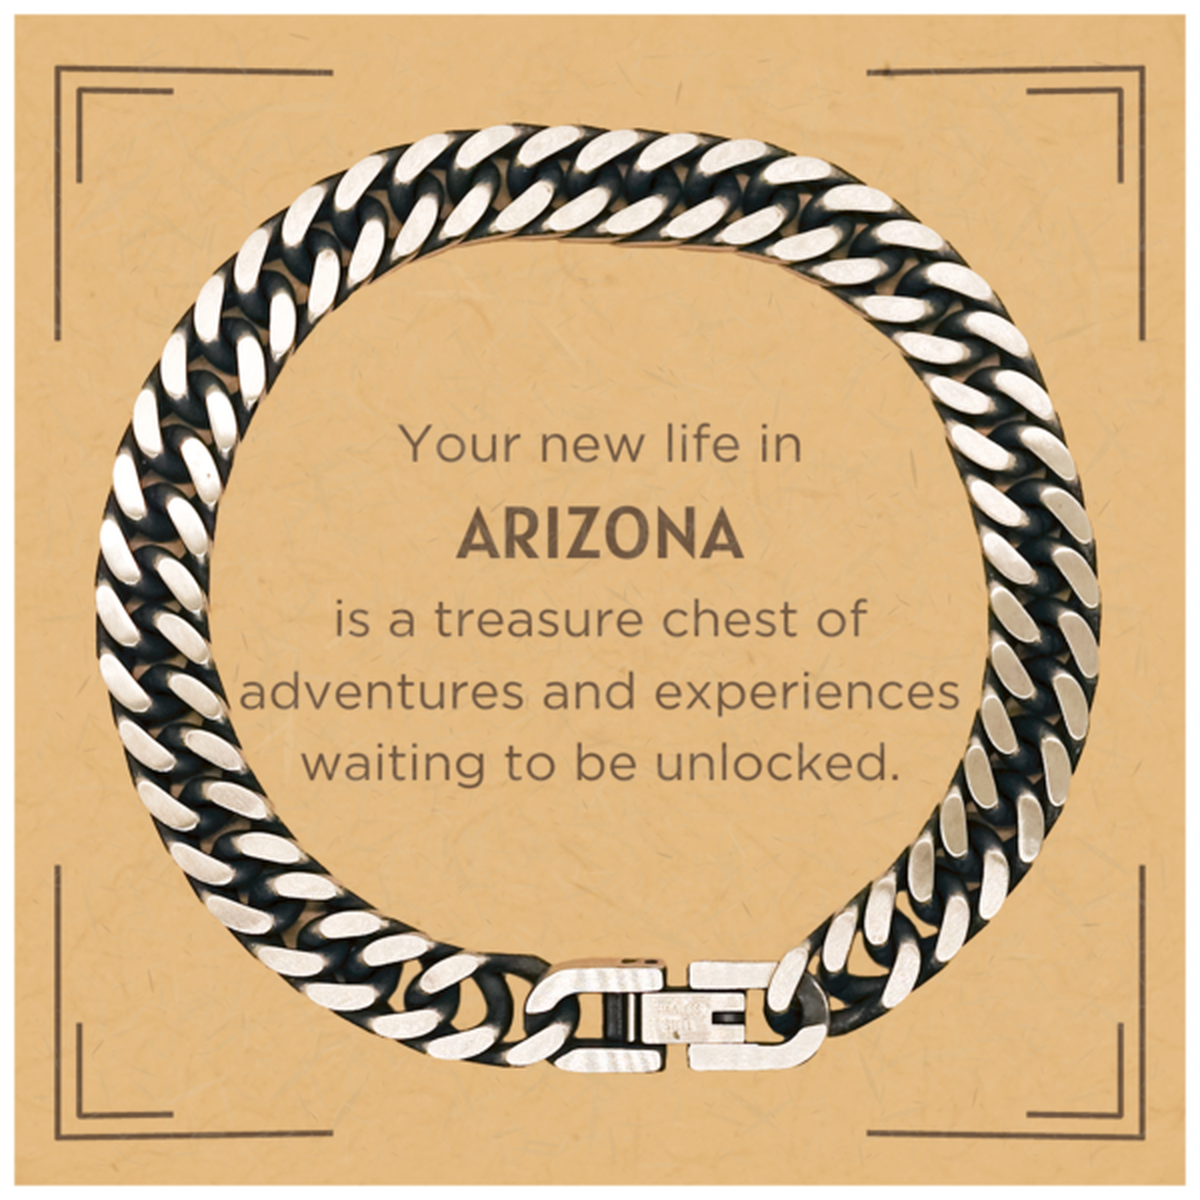 Moving to Arizona Gifts, Your new life in Arizona, Long Distance Arizona Christmas Cuban Link Chain Bracelet For Men, Women, Friends, Coworkers